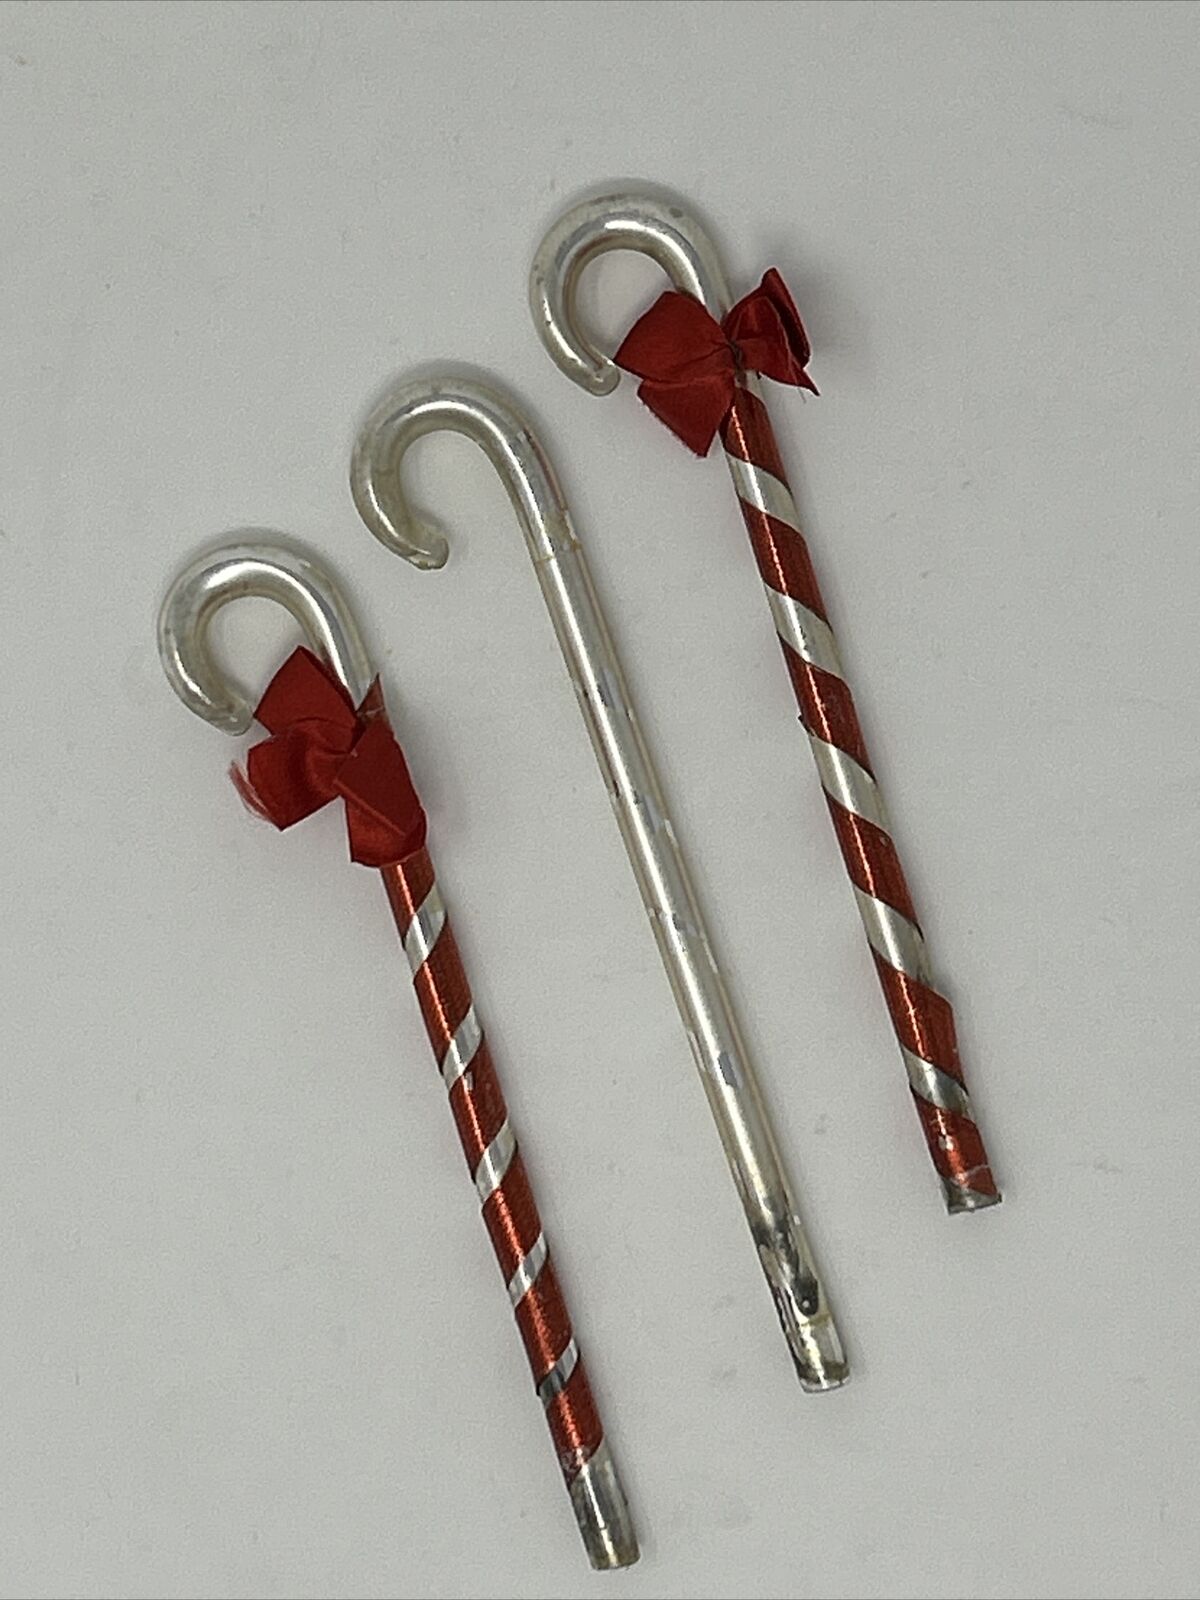 1940s Mercury Glass Christmas Candy Cane Ornaments, Vintage, 3, may be Kentlee?